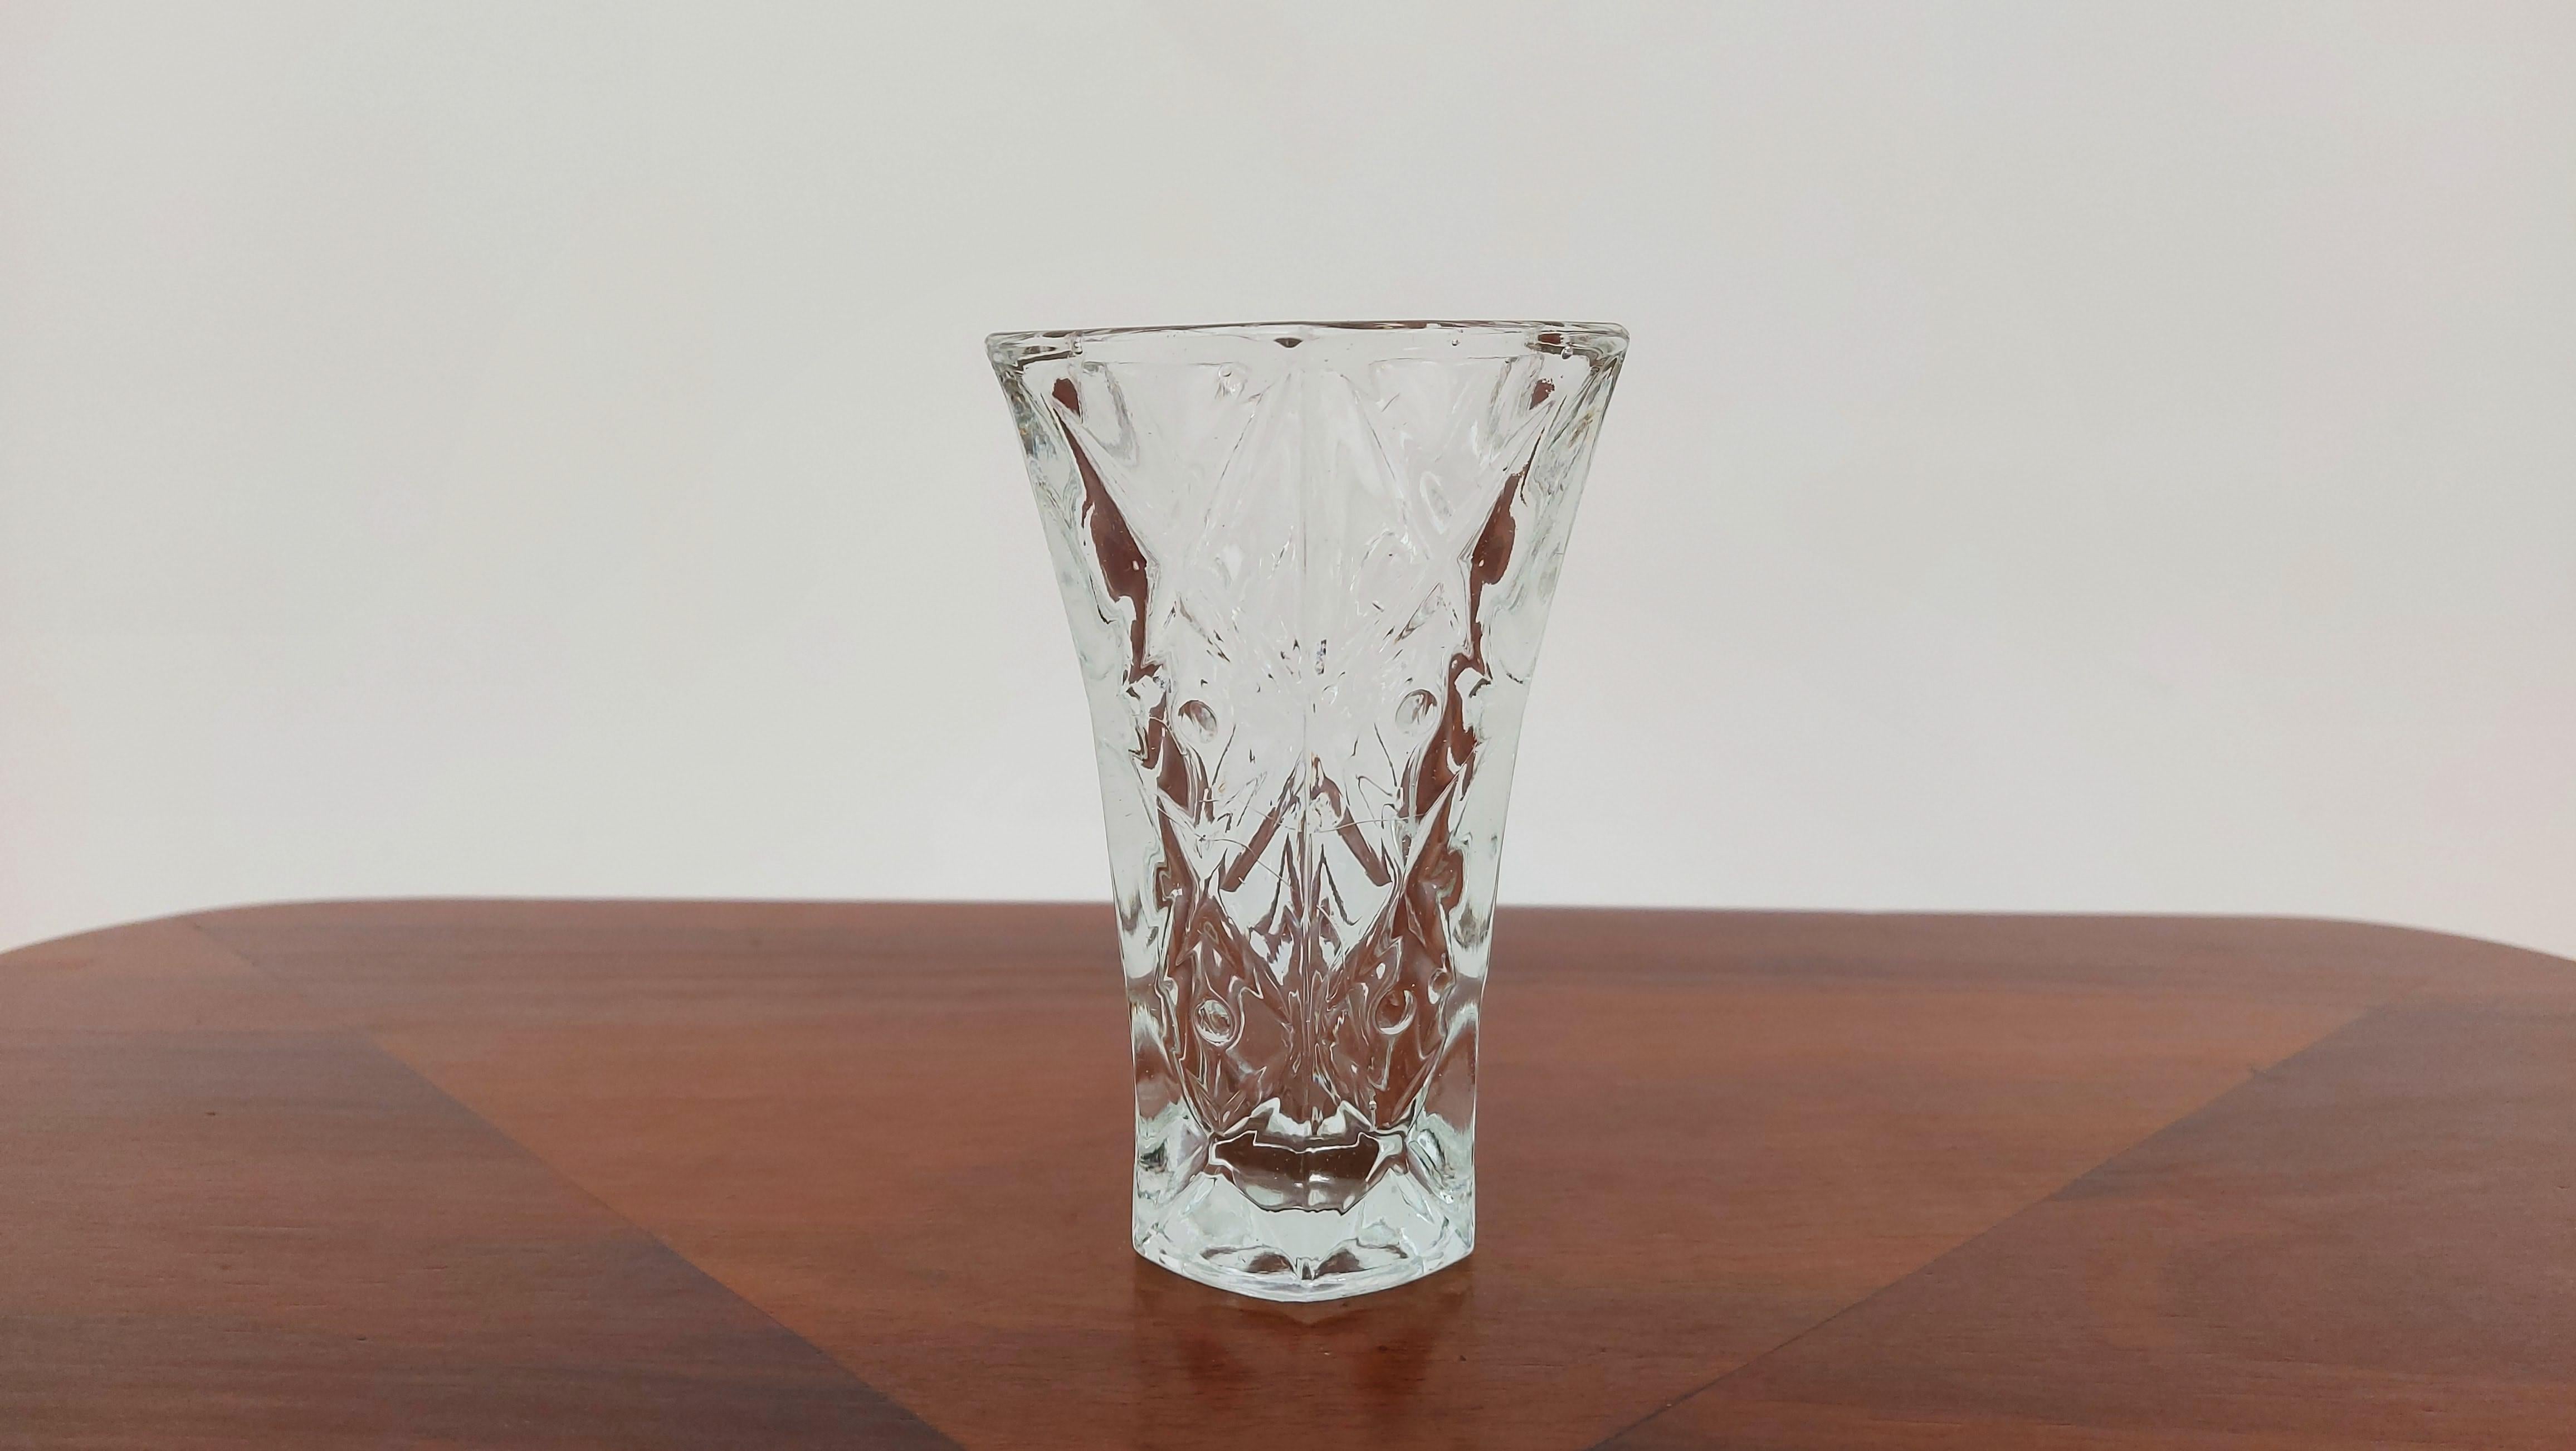 A small vase made of sodium glass.

Made in Poland in the 20/30s.

Very good condition of the vase, no damage.

Height 12,5 cm / diameter 8 cm.